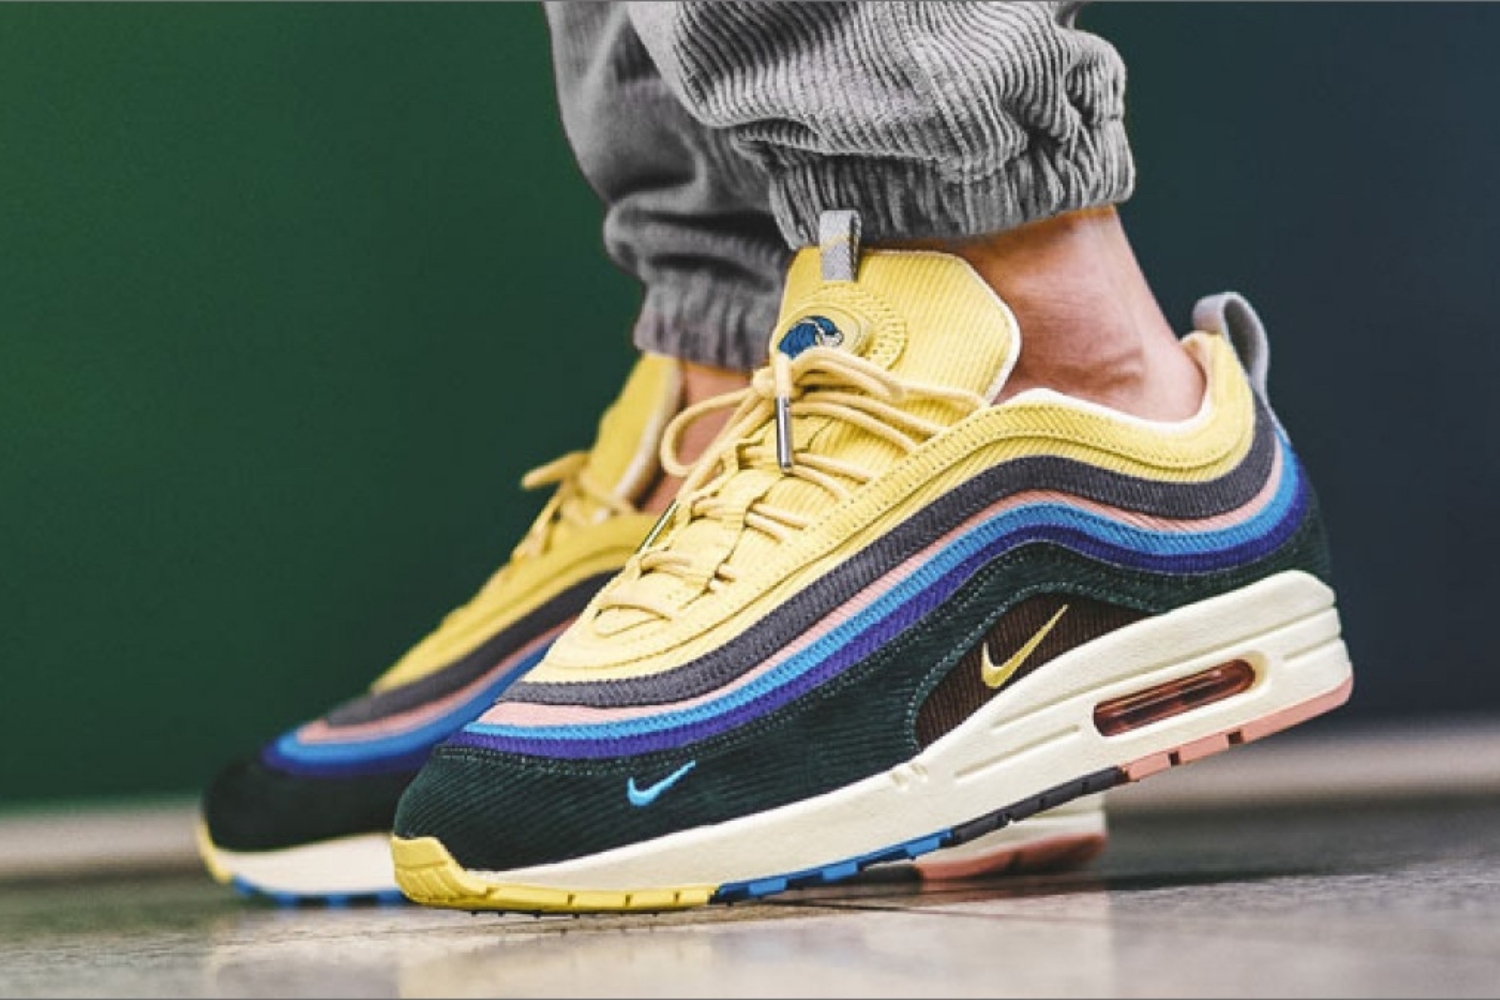 The Nike Air Max 97 and its best collabs